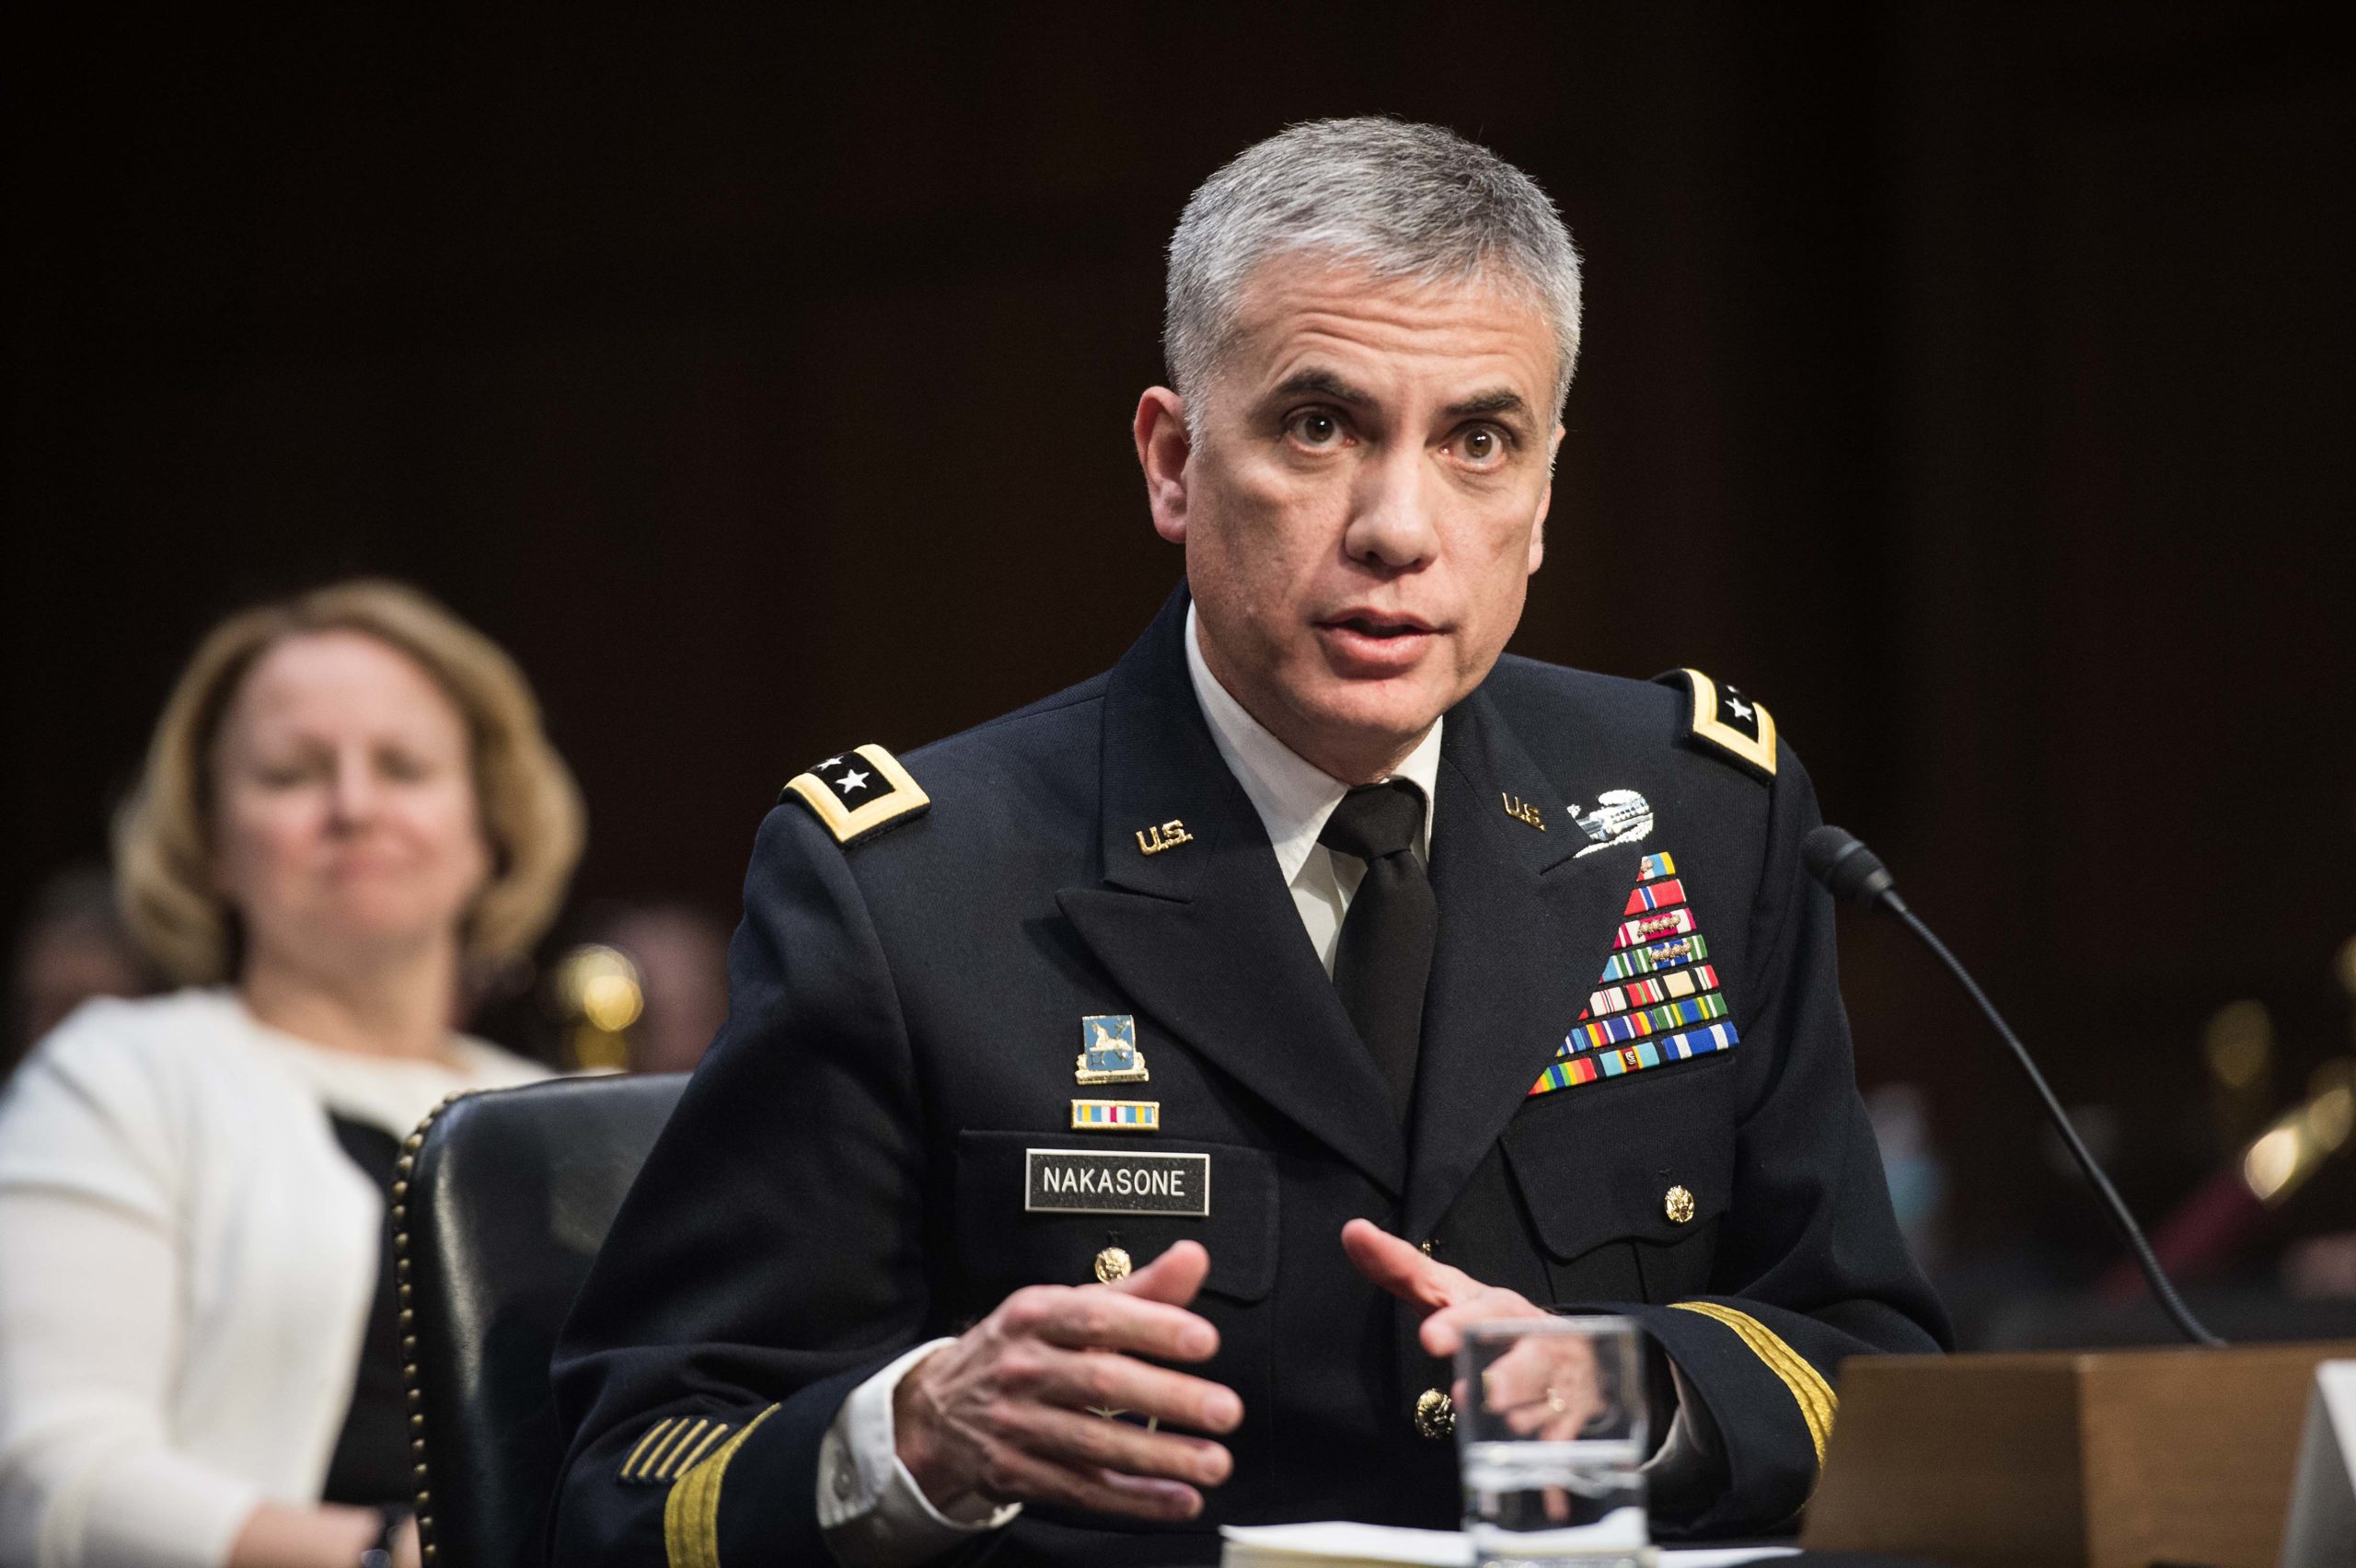 Commander of the US Army Cyber Command Paul Nakasone speaks during his confirmation hearing before the Senate Intelligence Committee to be the director of the National Security Agency (NSA) in Washington, DC, on March 15, 2018. (Photo by NICHOLAS KAMM / AFP) (Photo by NICHOLAS KAMM/AFP via Getty Images)